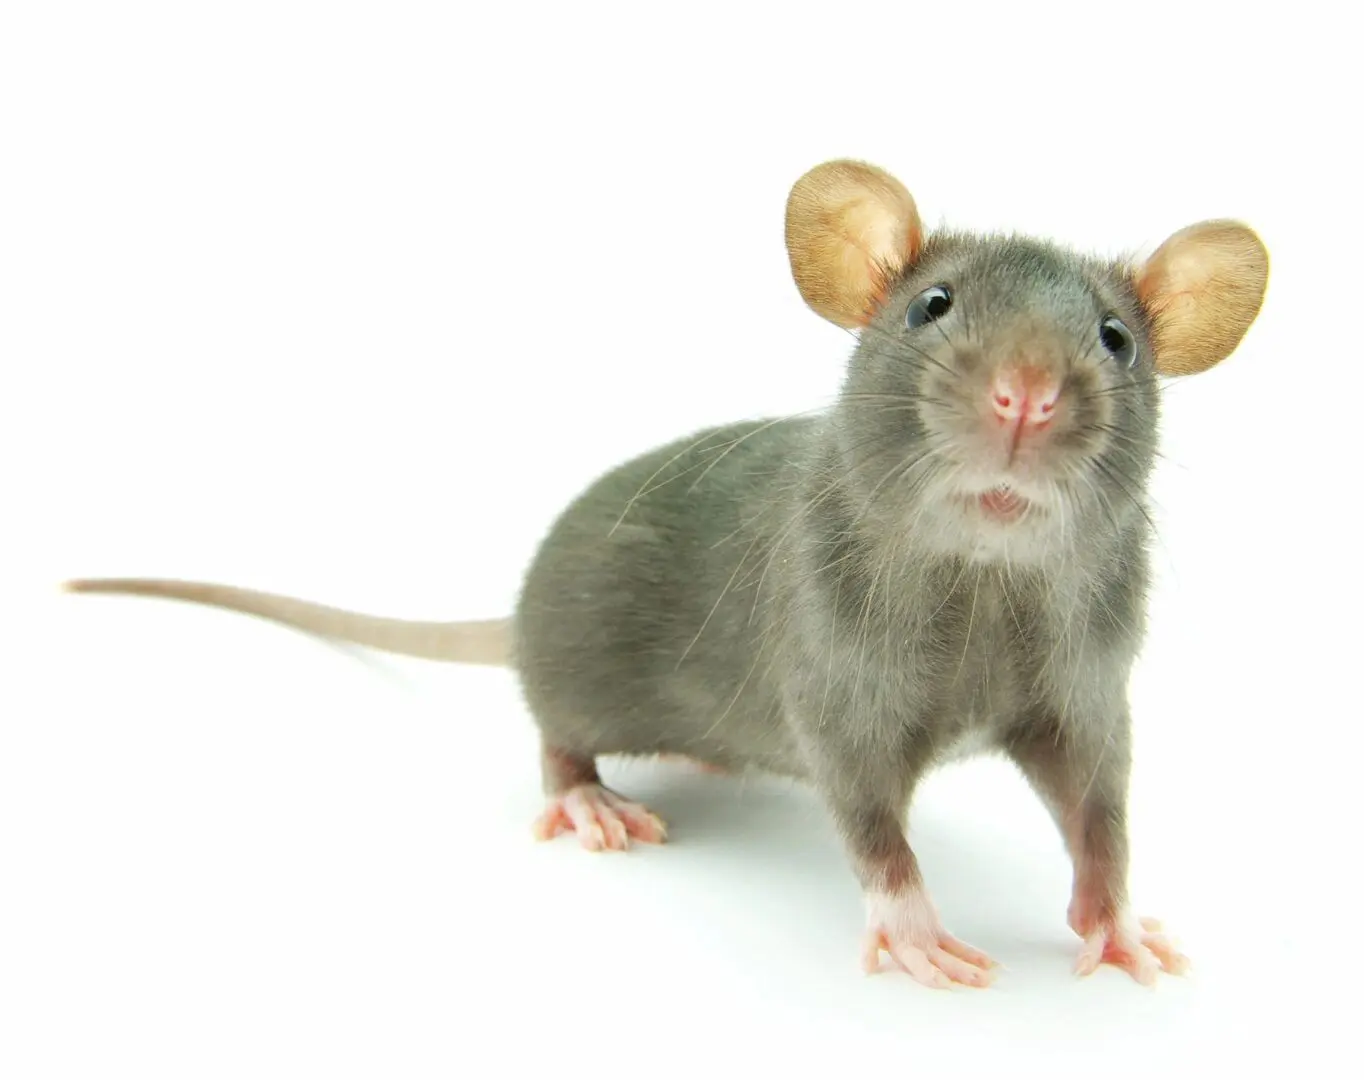 A rat with long ears is standing on the floor.